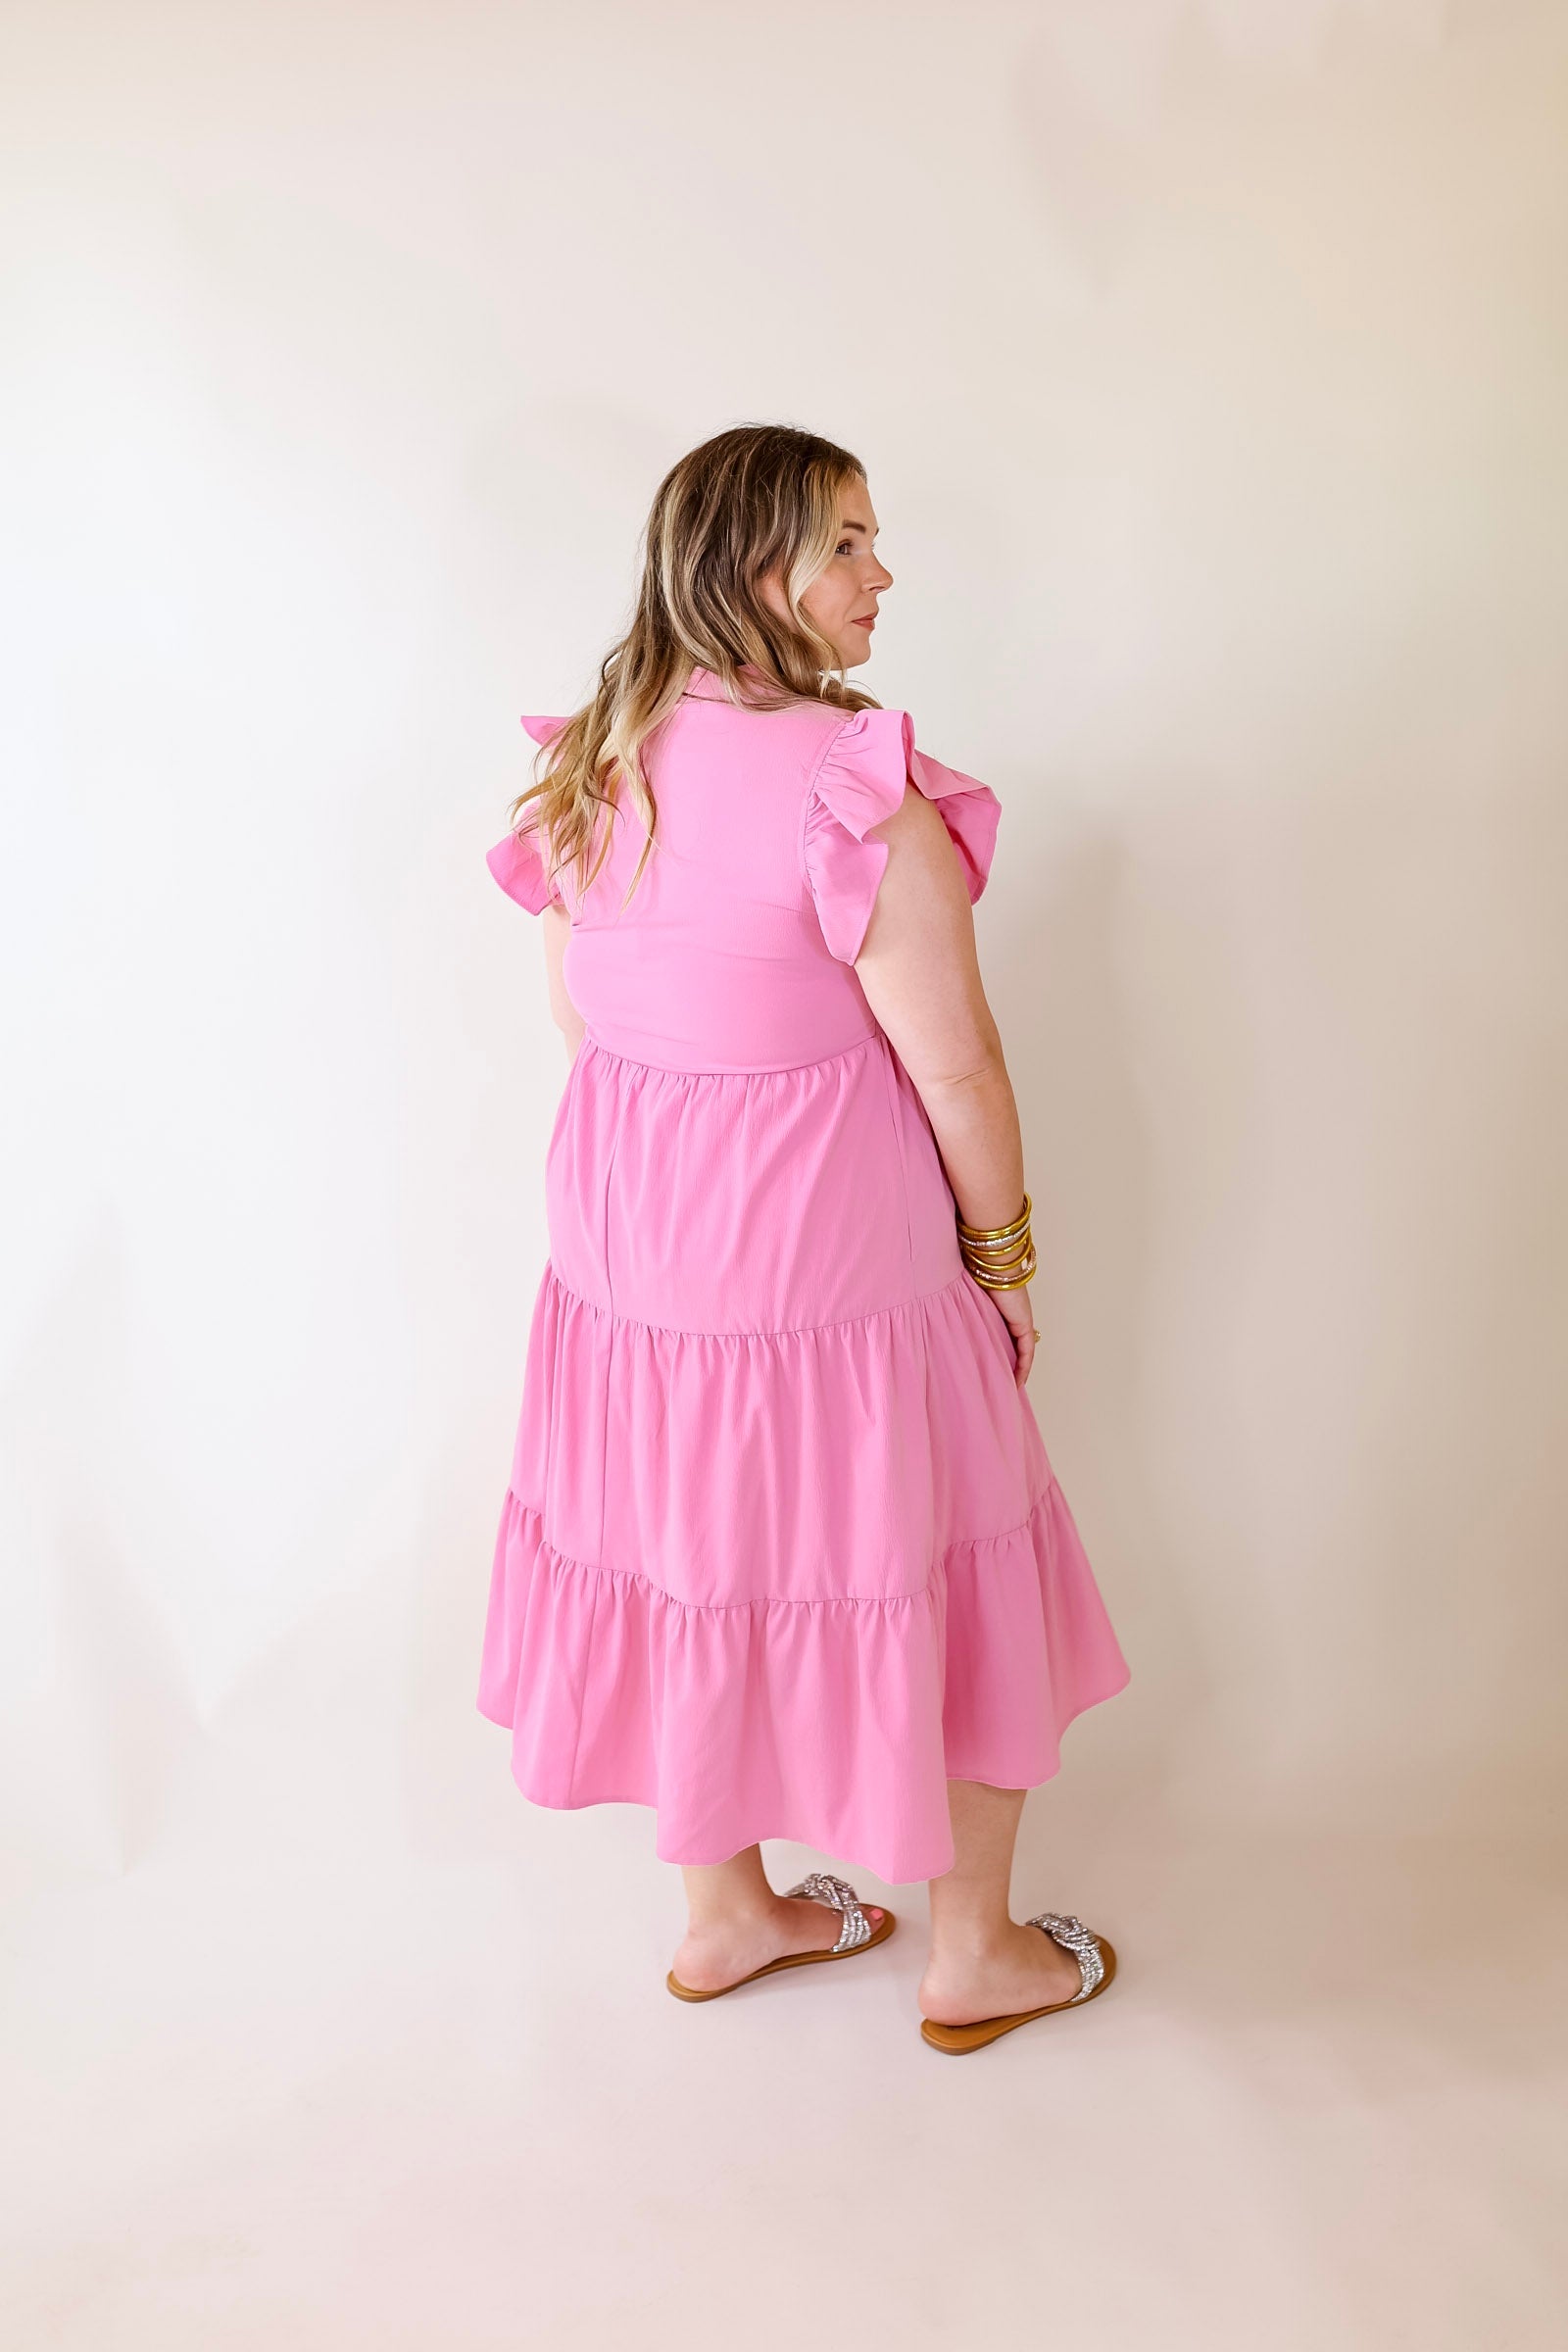 Magnolia Morning Ruffle Cap Sleeve Tiered Midi Dress in Pink - Giddy Up Glamour Boutique